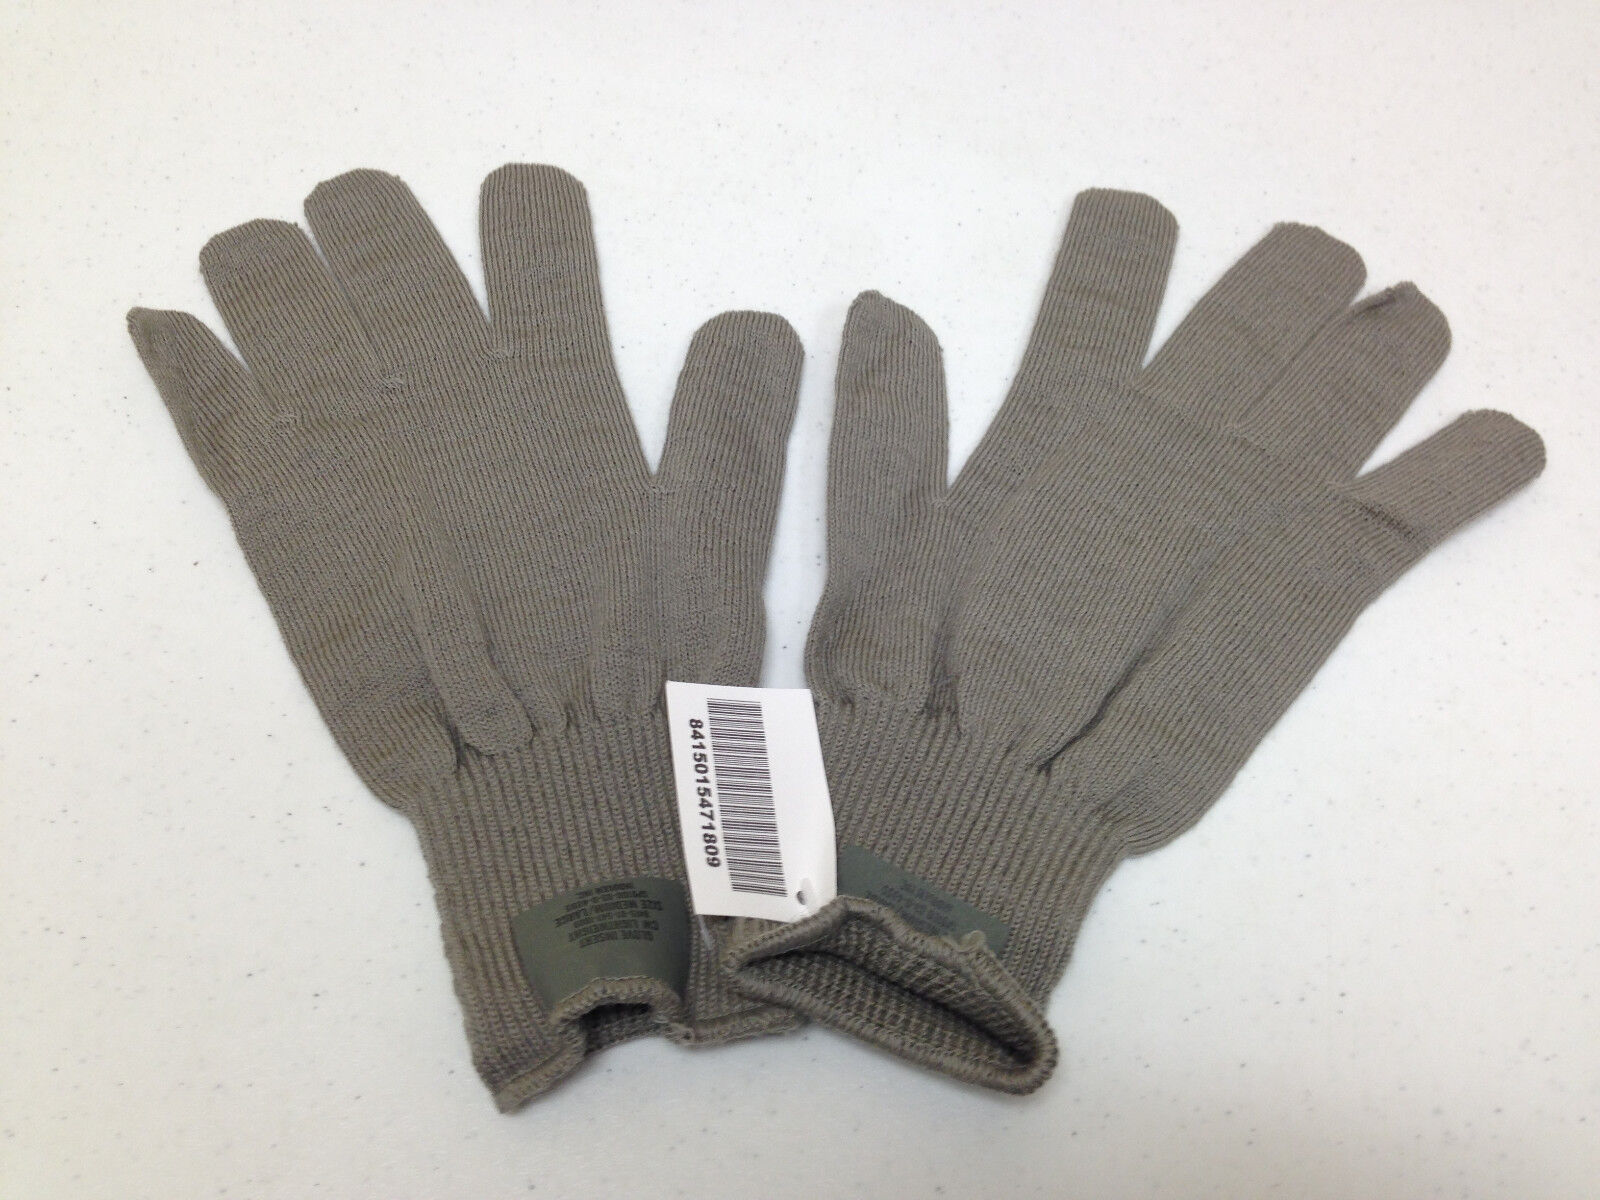 WOOL GLOVE INSERTS LINERS CW LIGHTWEIGHT MEDIUM LARGE GRAY NWT 1809